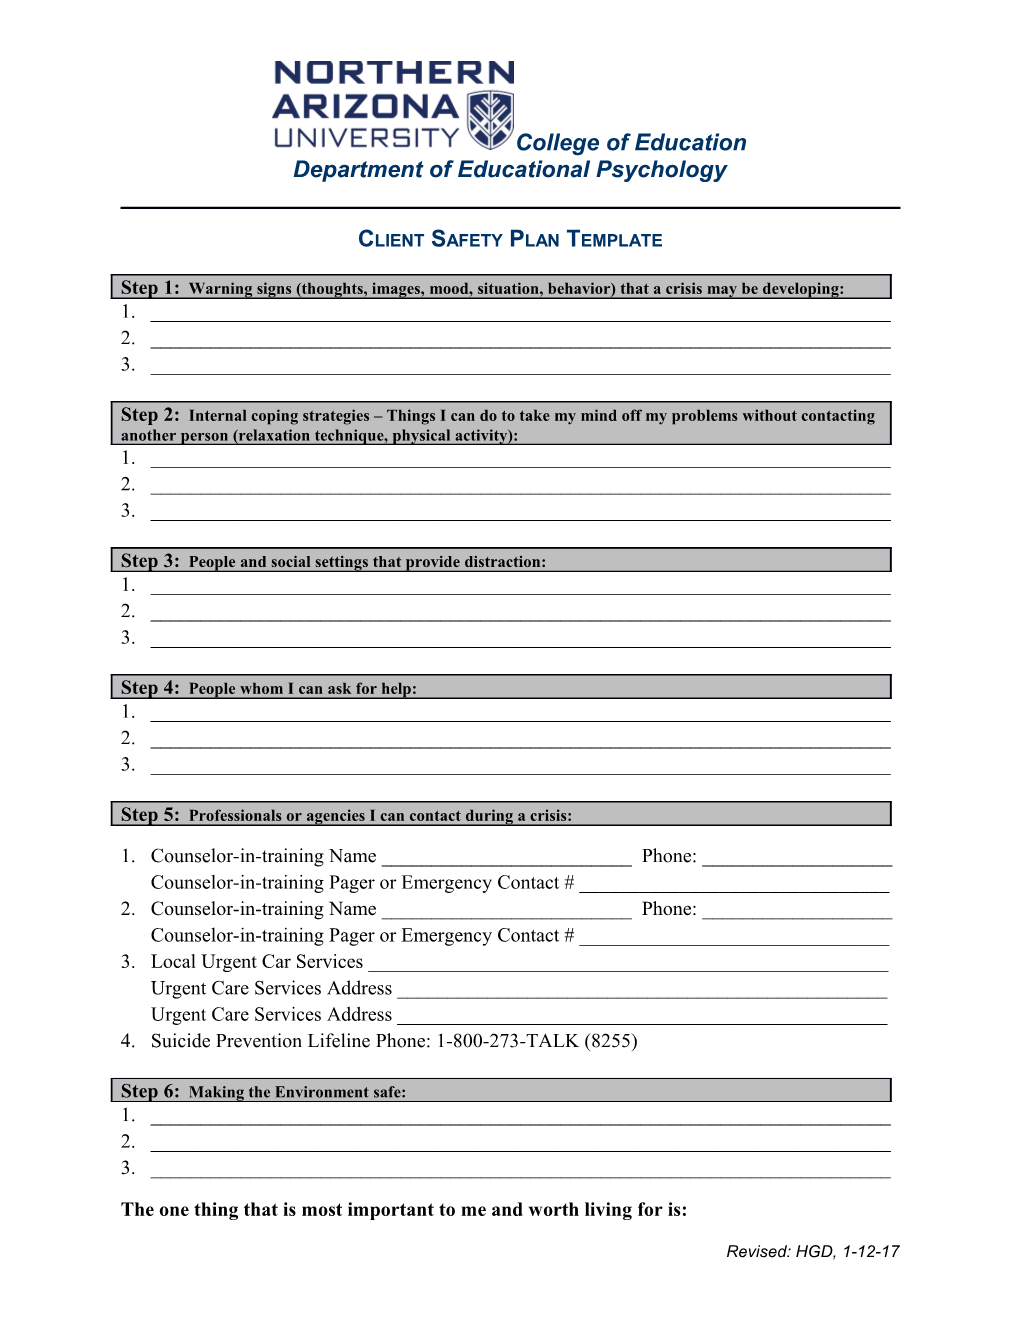 Client Safety Plan Template